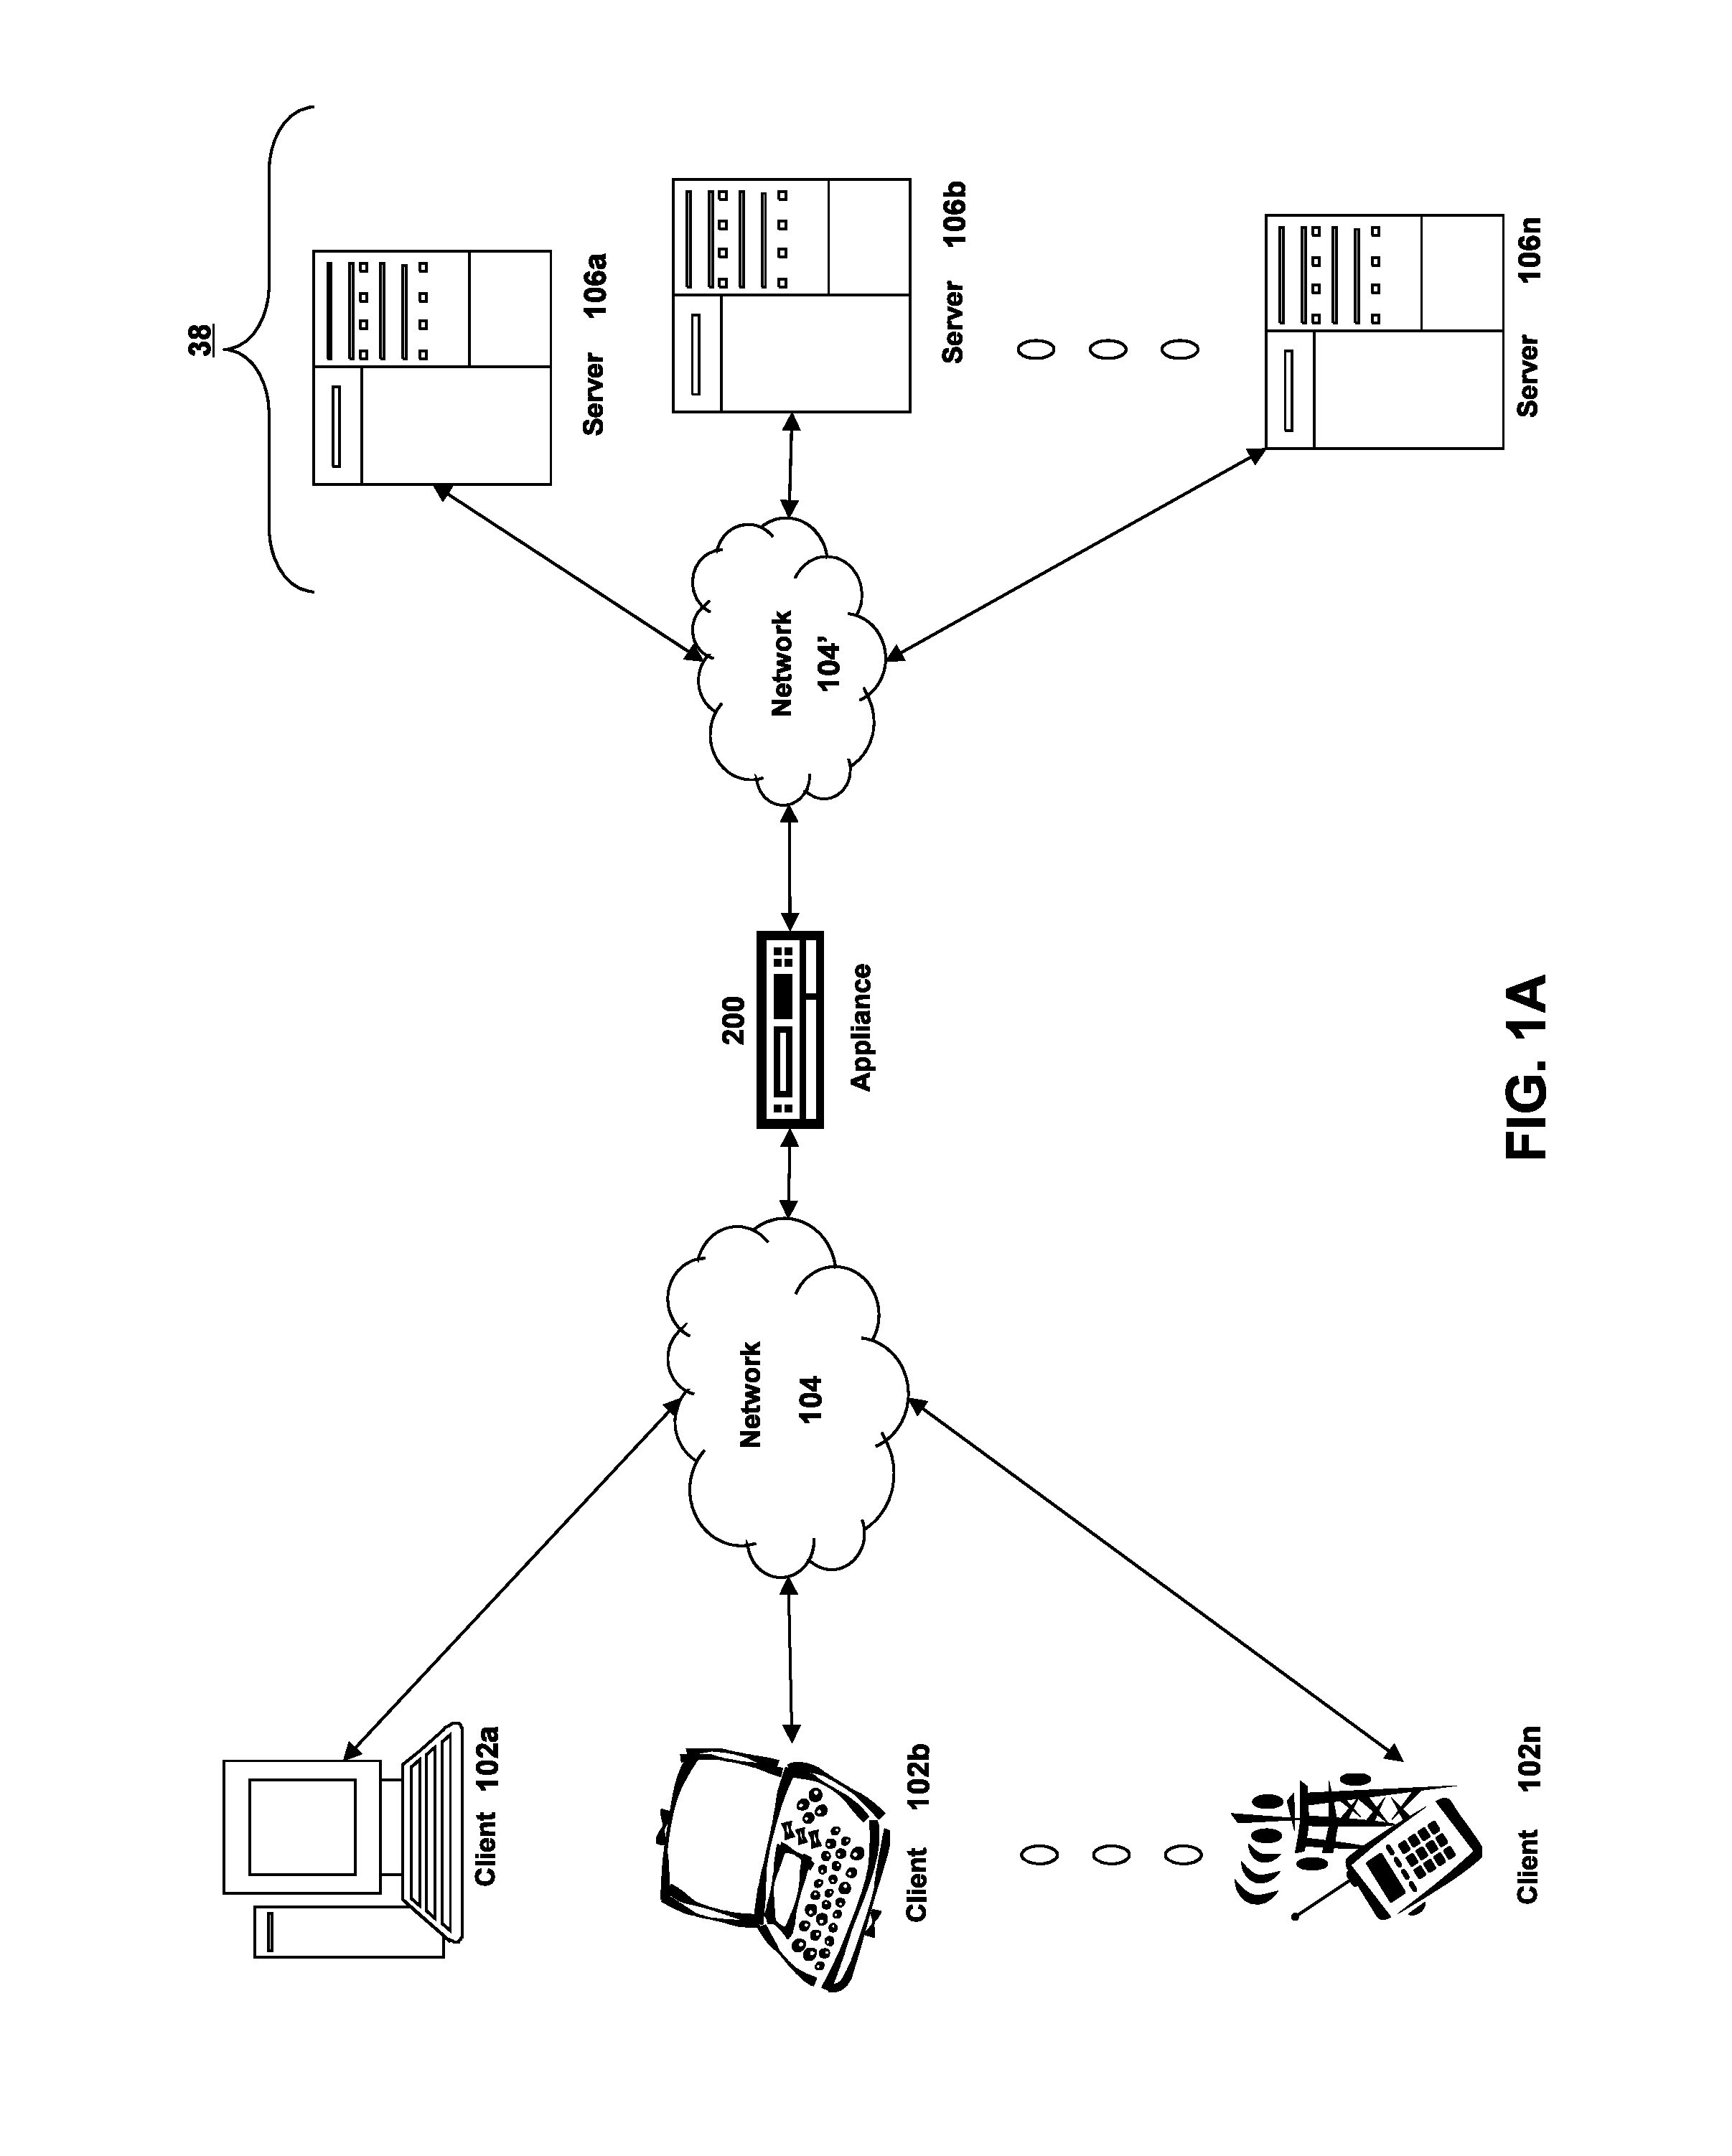 Systems and methods for flexible, extensible authentication subsystem that enabled enhance security for applications